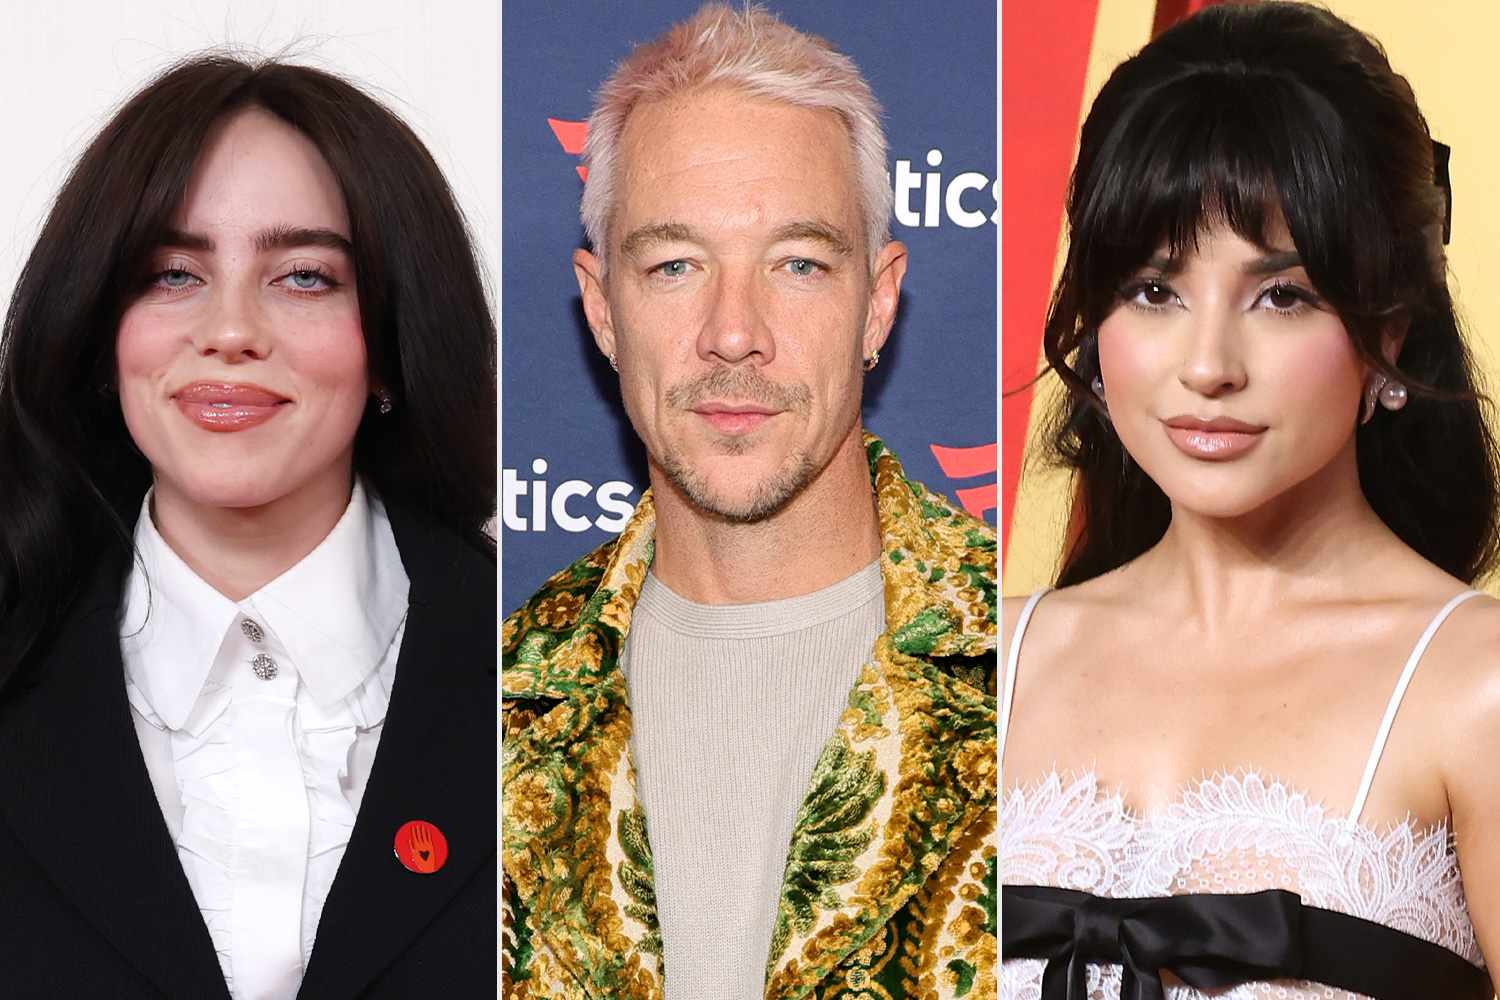 Billie Eilish, Fall Out Boy, Cyndi Lauper and More Sign Letter Advocating for Concert Ticket Transparency